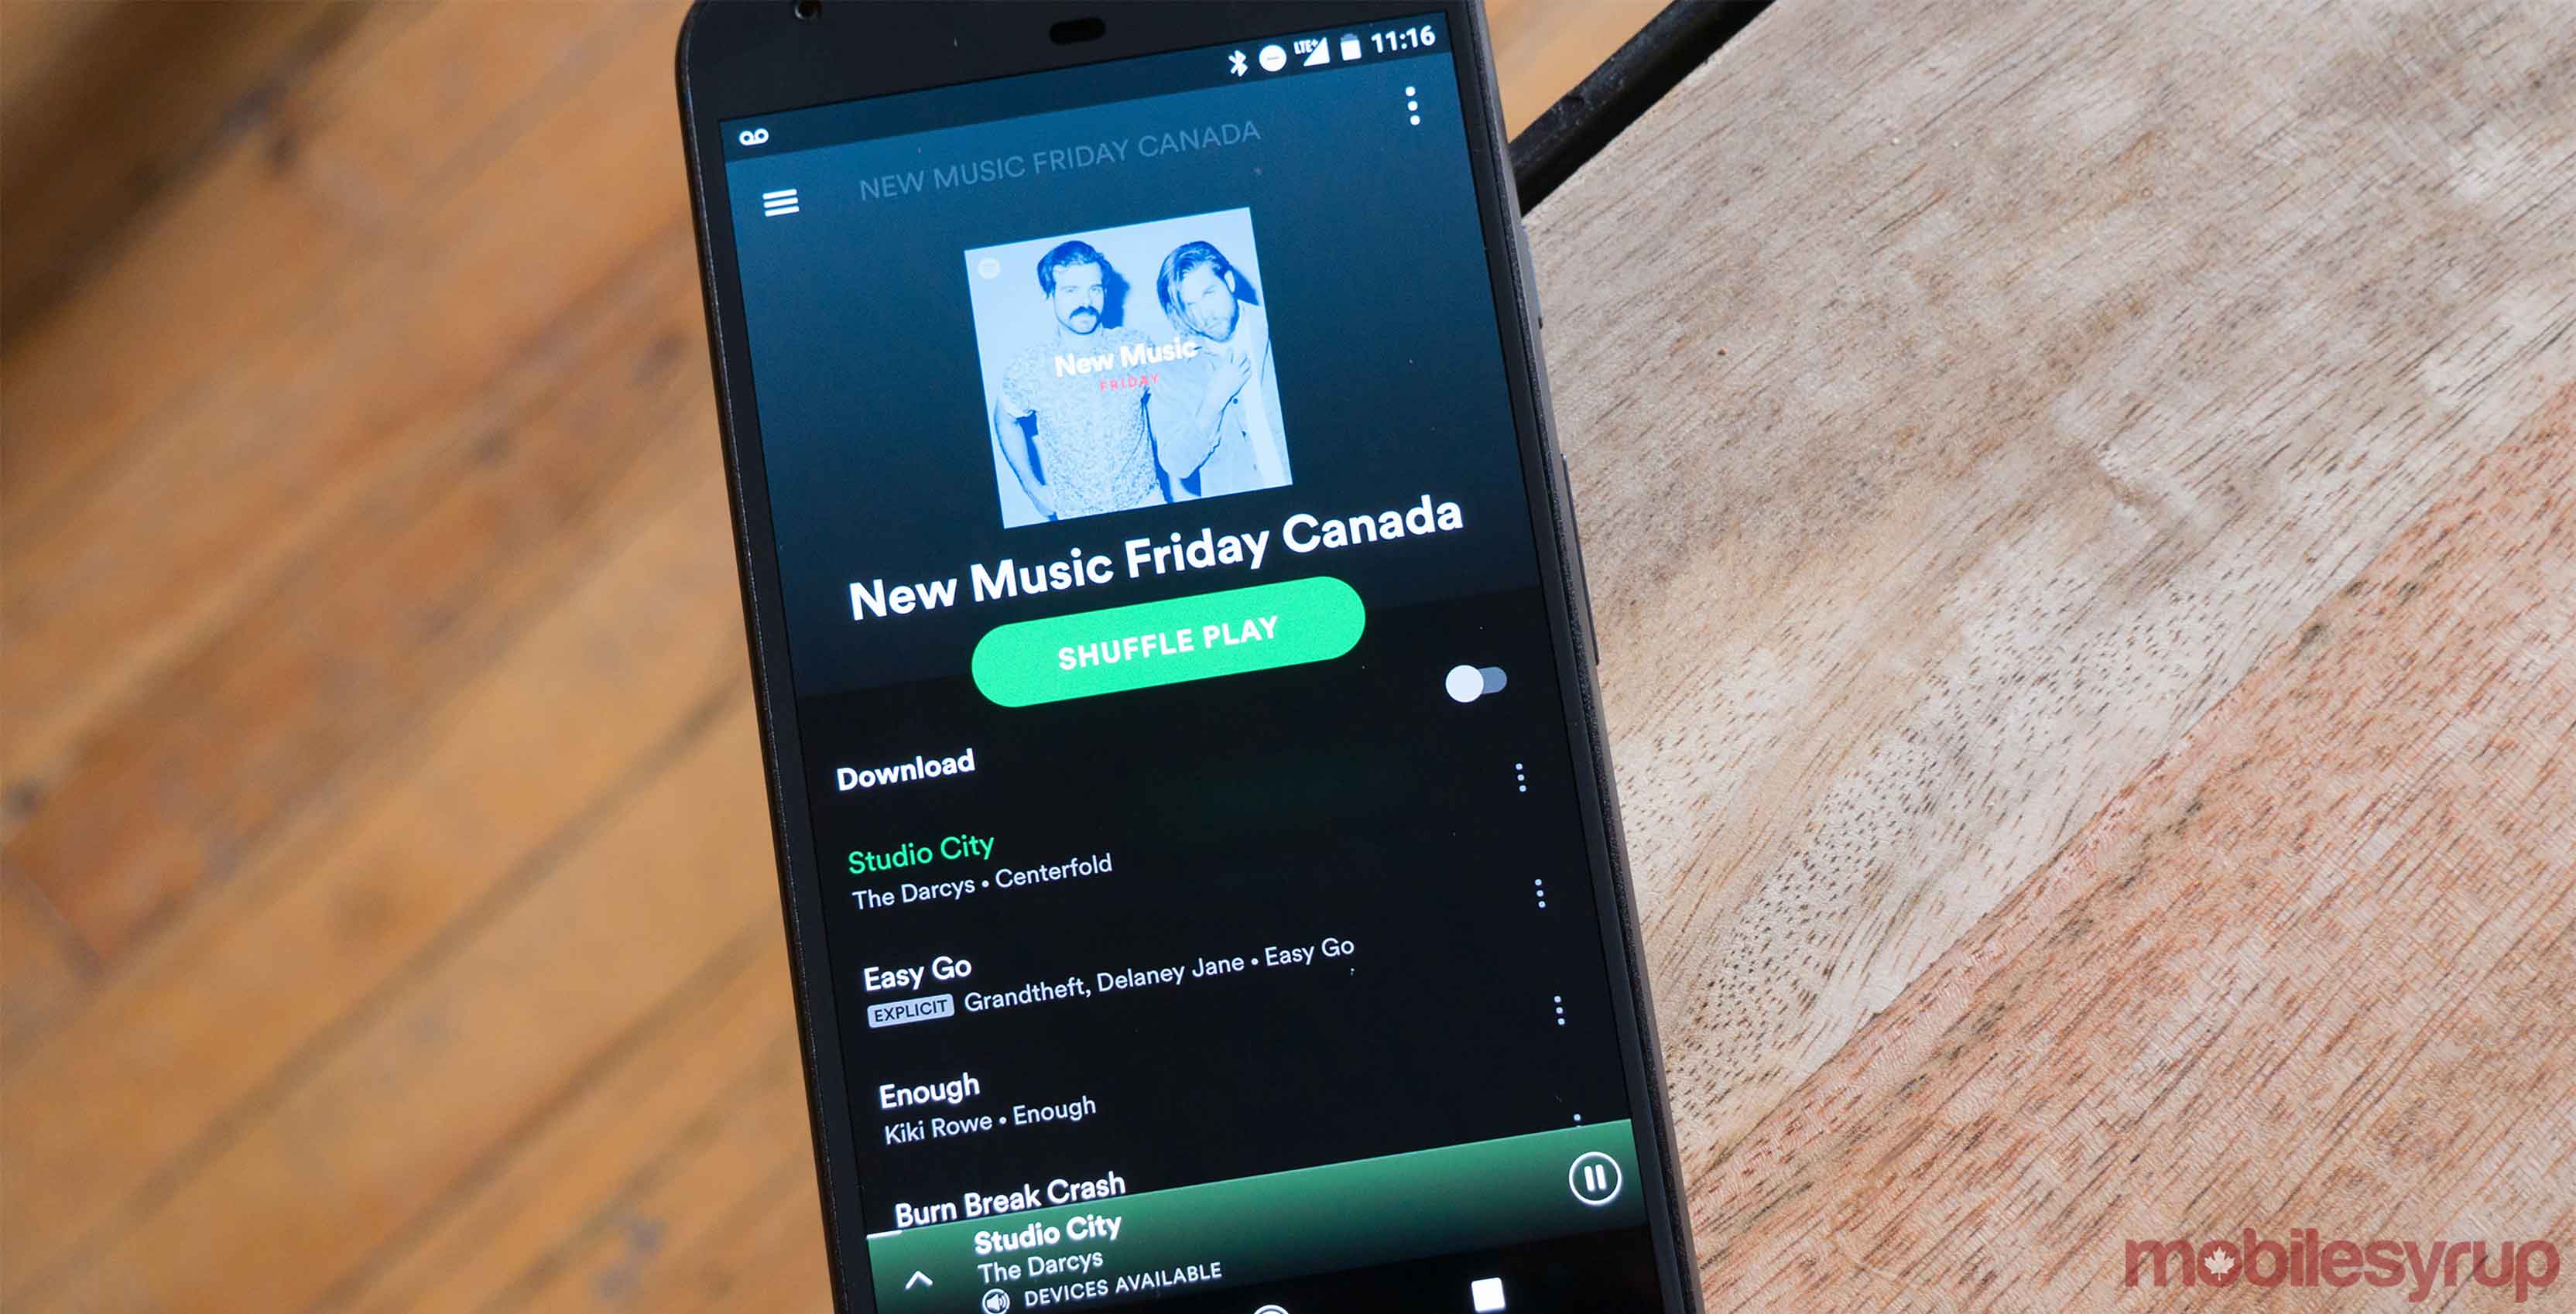 Spotify app on an iPhone